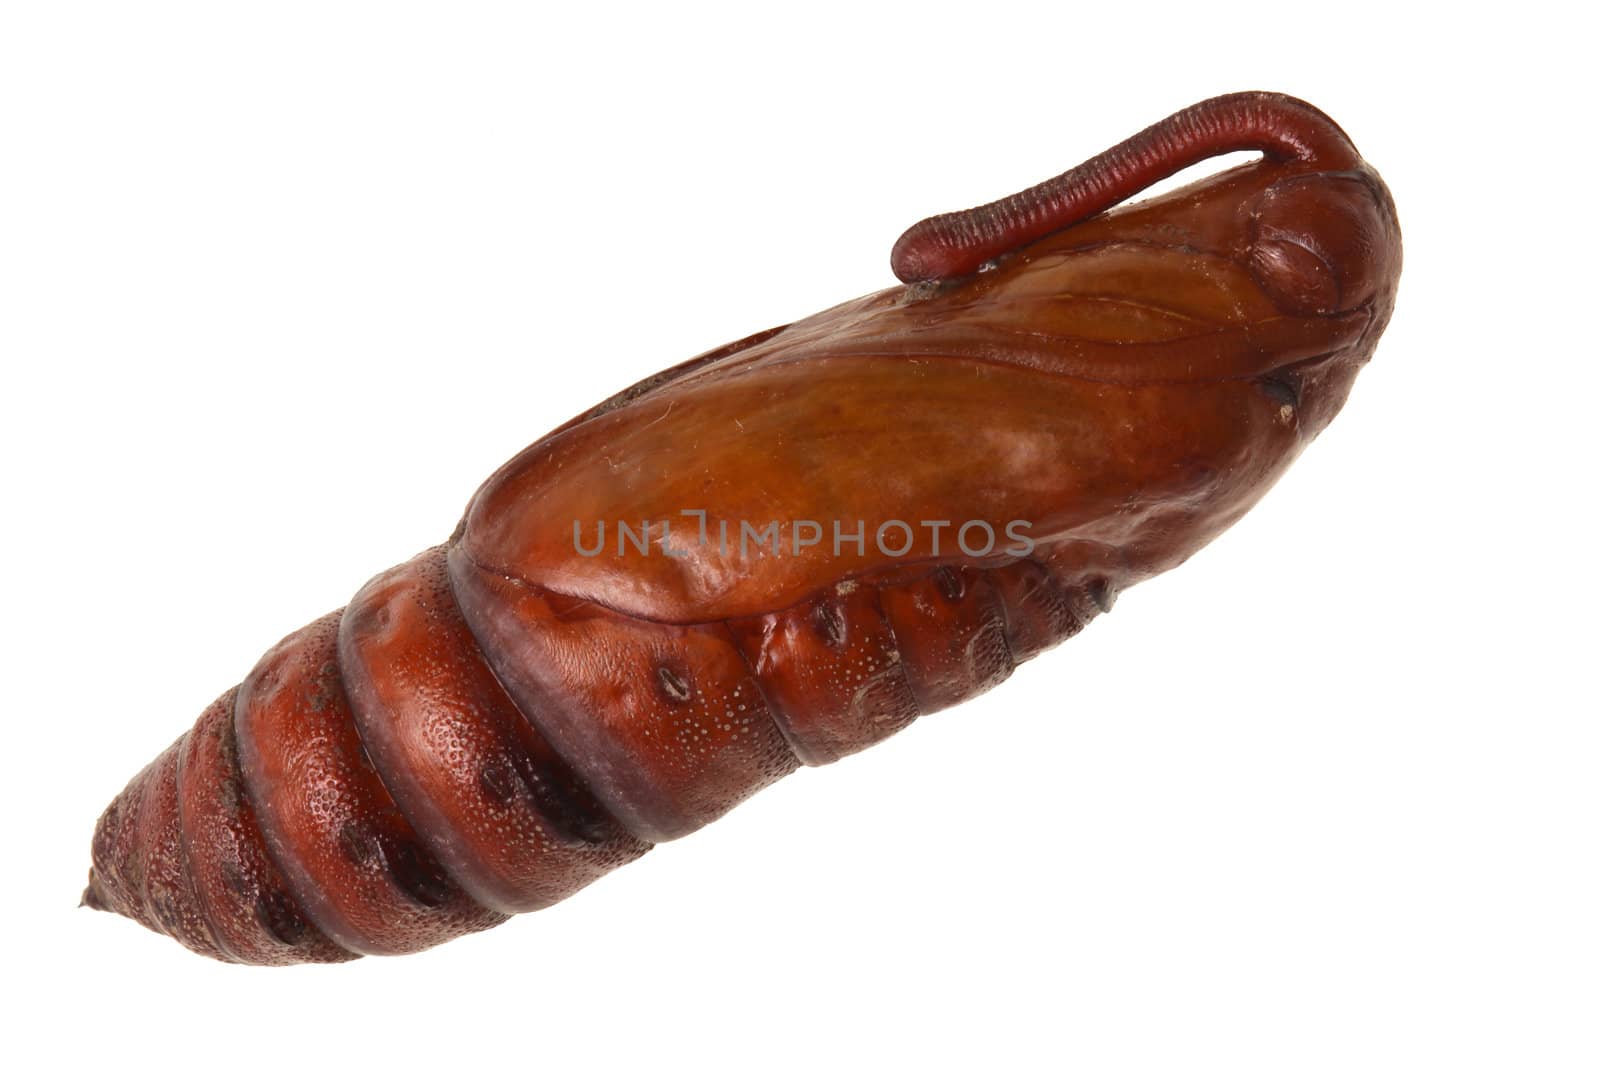 Pupa or chrysalis of an unknown moth species, most likely a tobacco or tomato hawkmoth, Manduca sexta or quinquemaculata, isolated against a white background